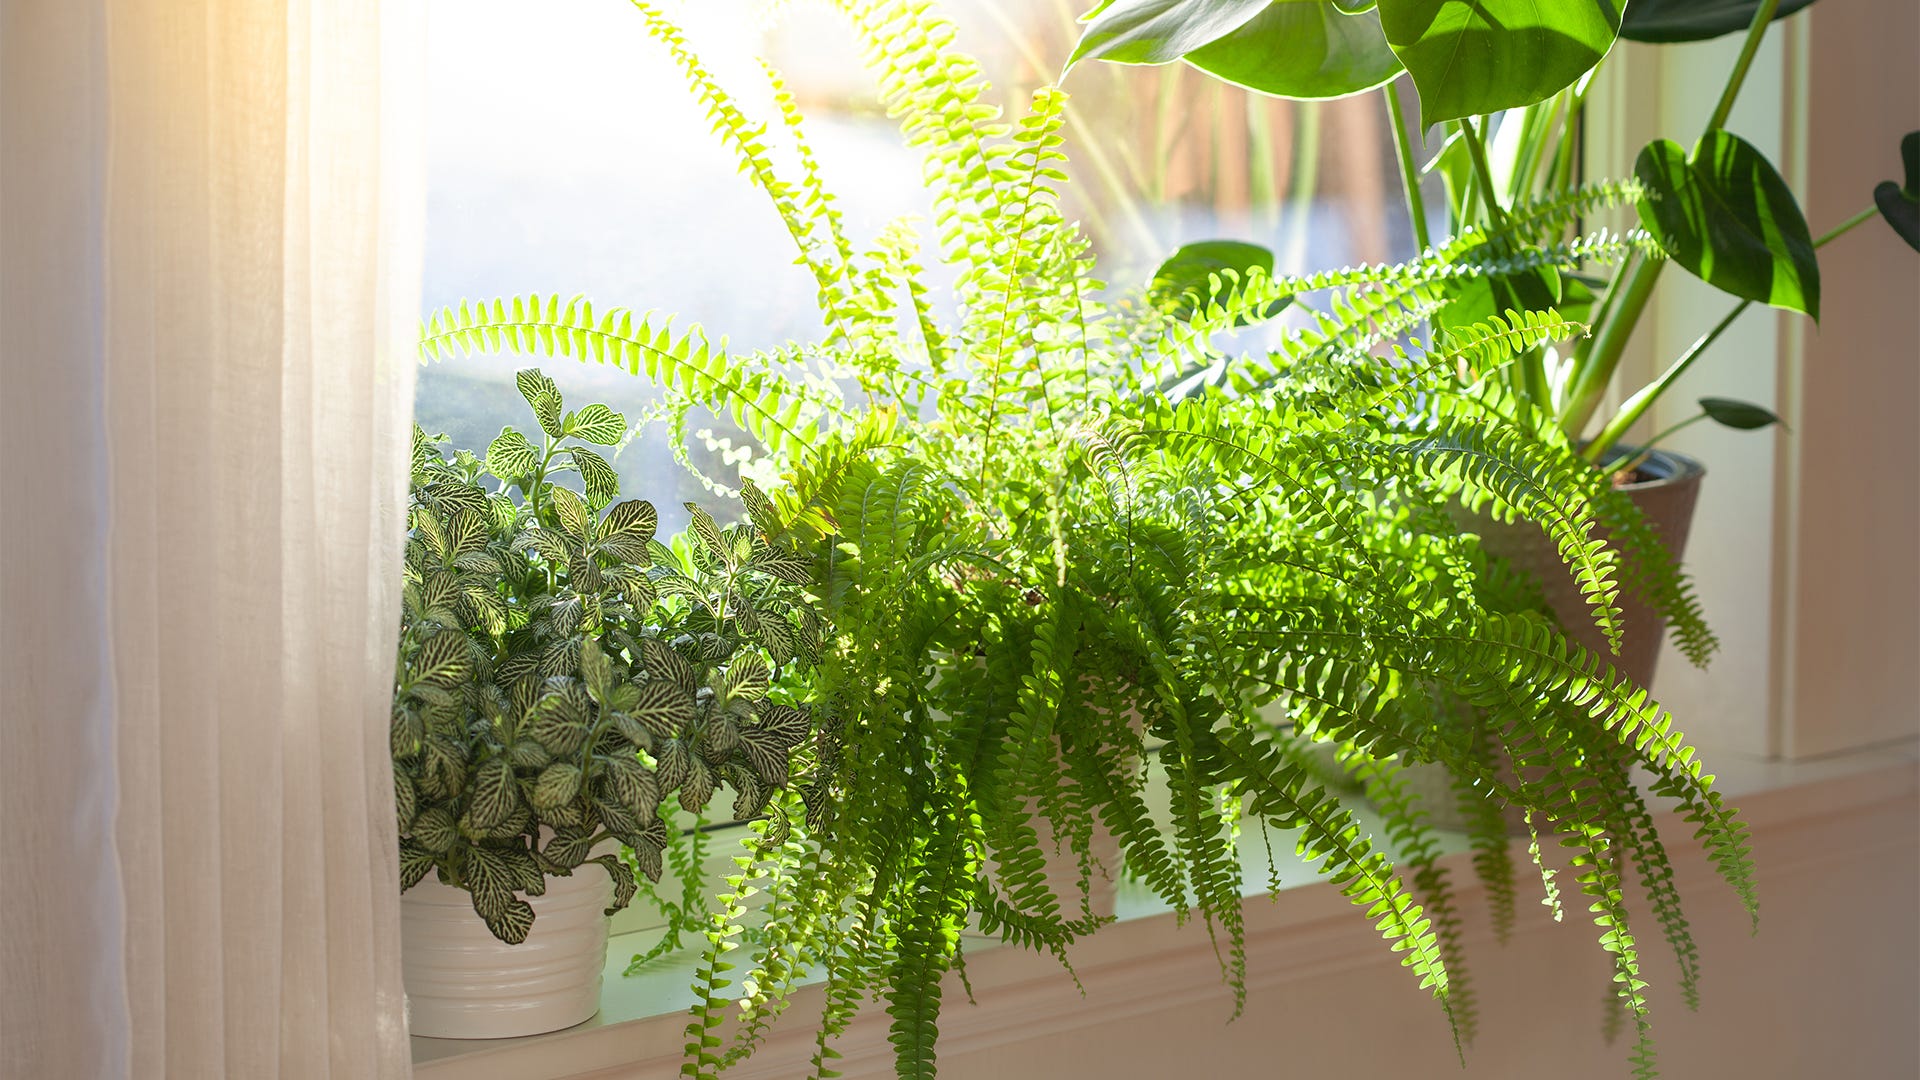 15 Houseplant Pests and Ways to Get Rid of Them